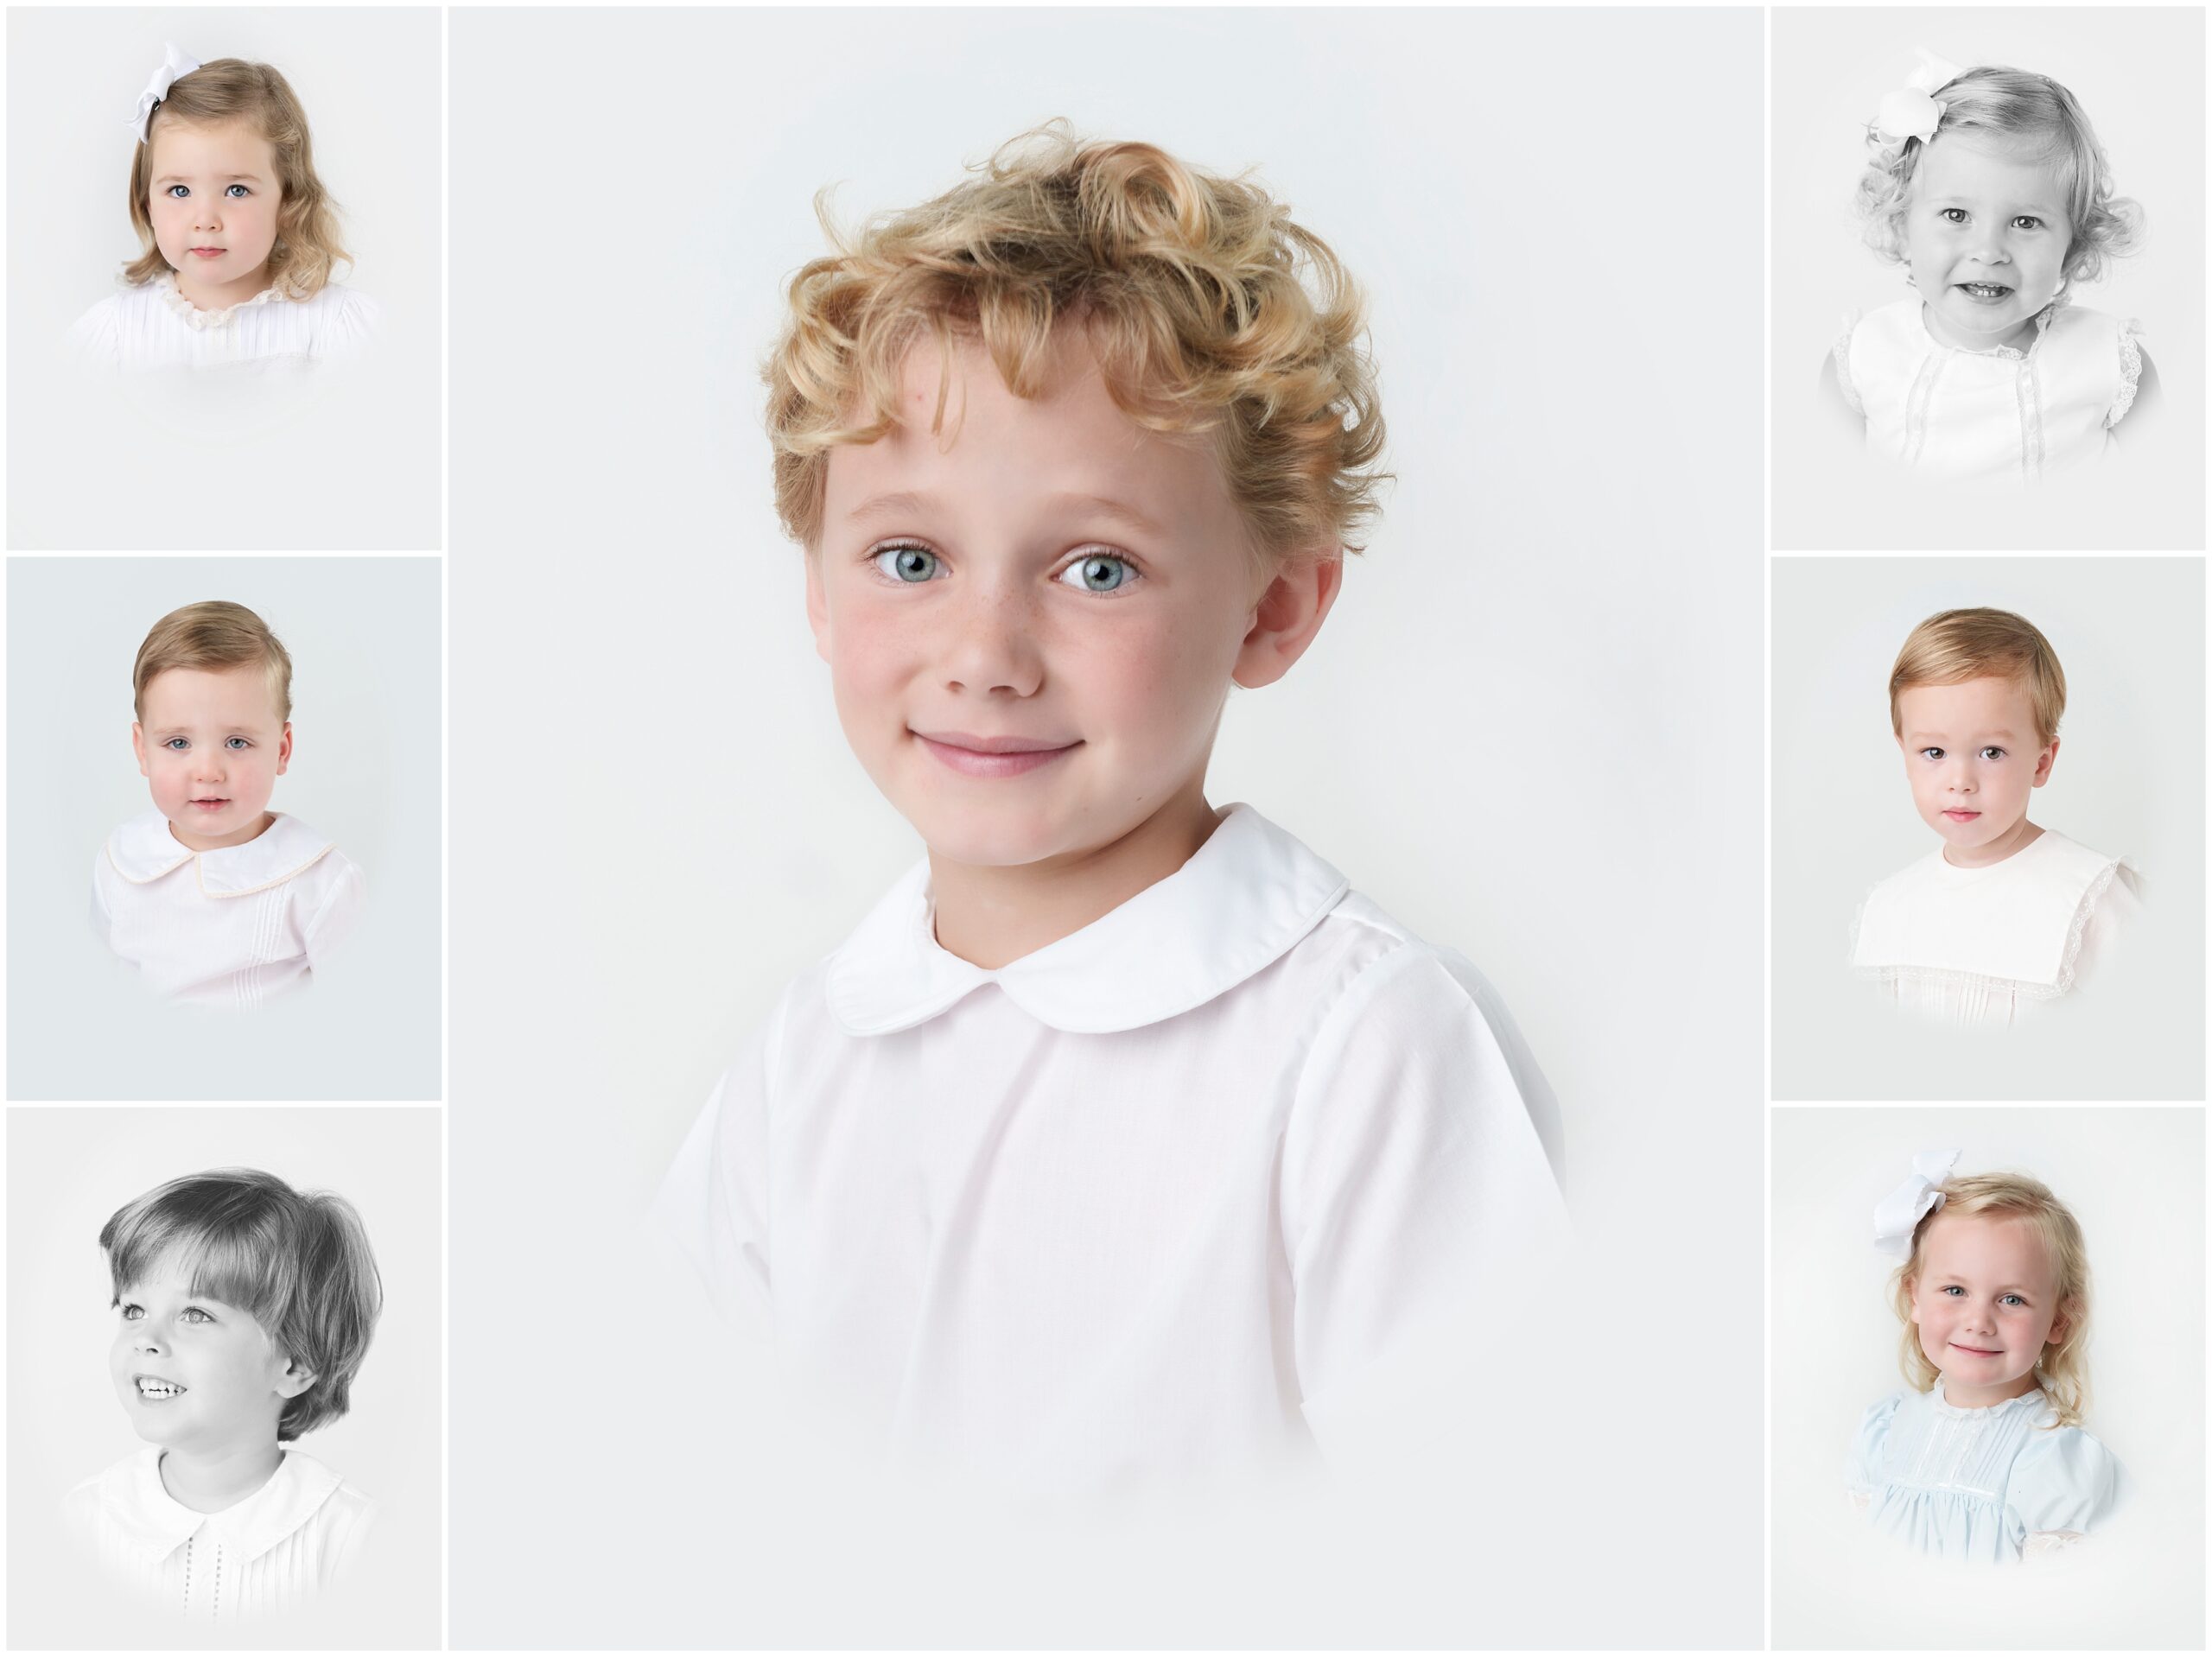 collection of children who have been photographed in an heirloom bust portrait style